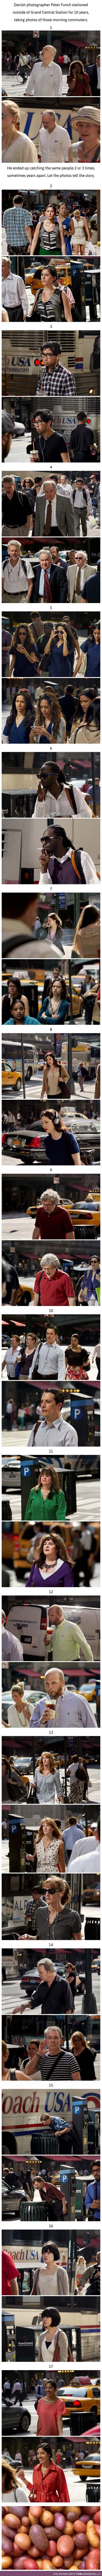 Photographer spends 9 years taking photos of  same people on their way back to work